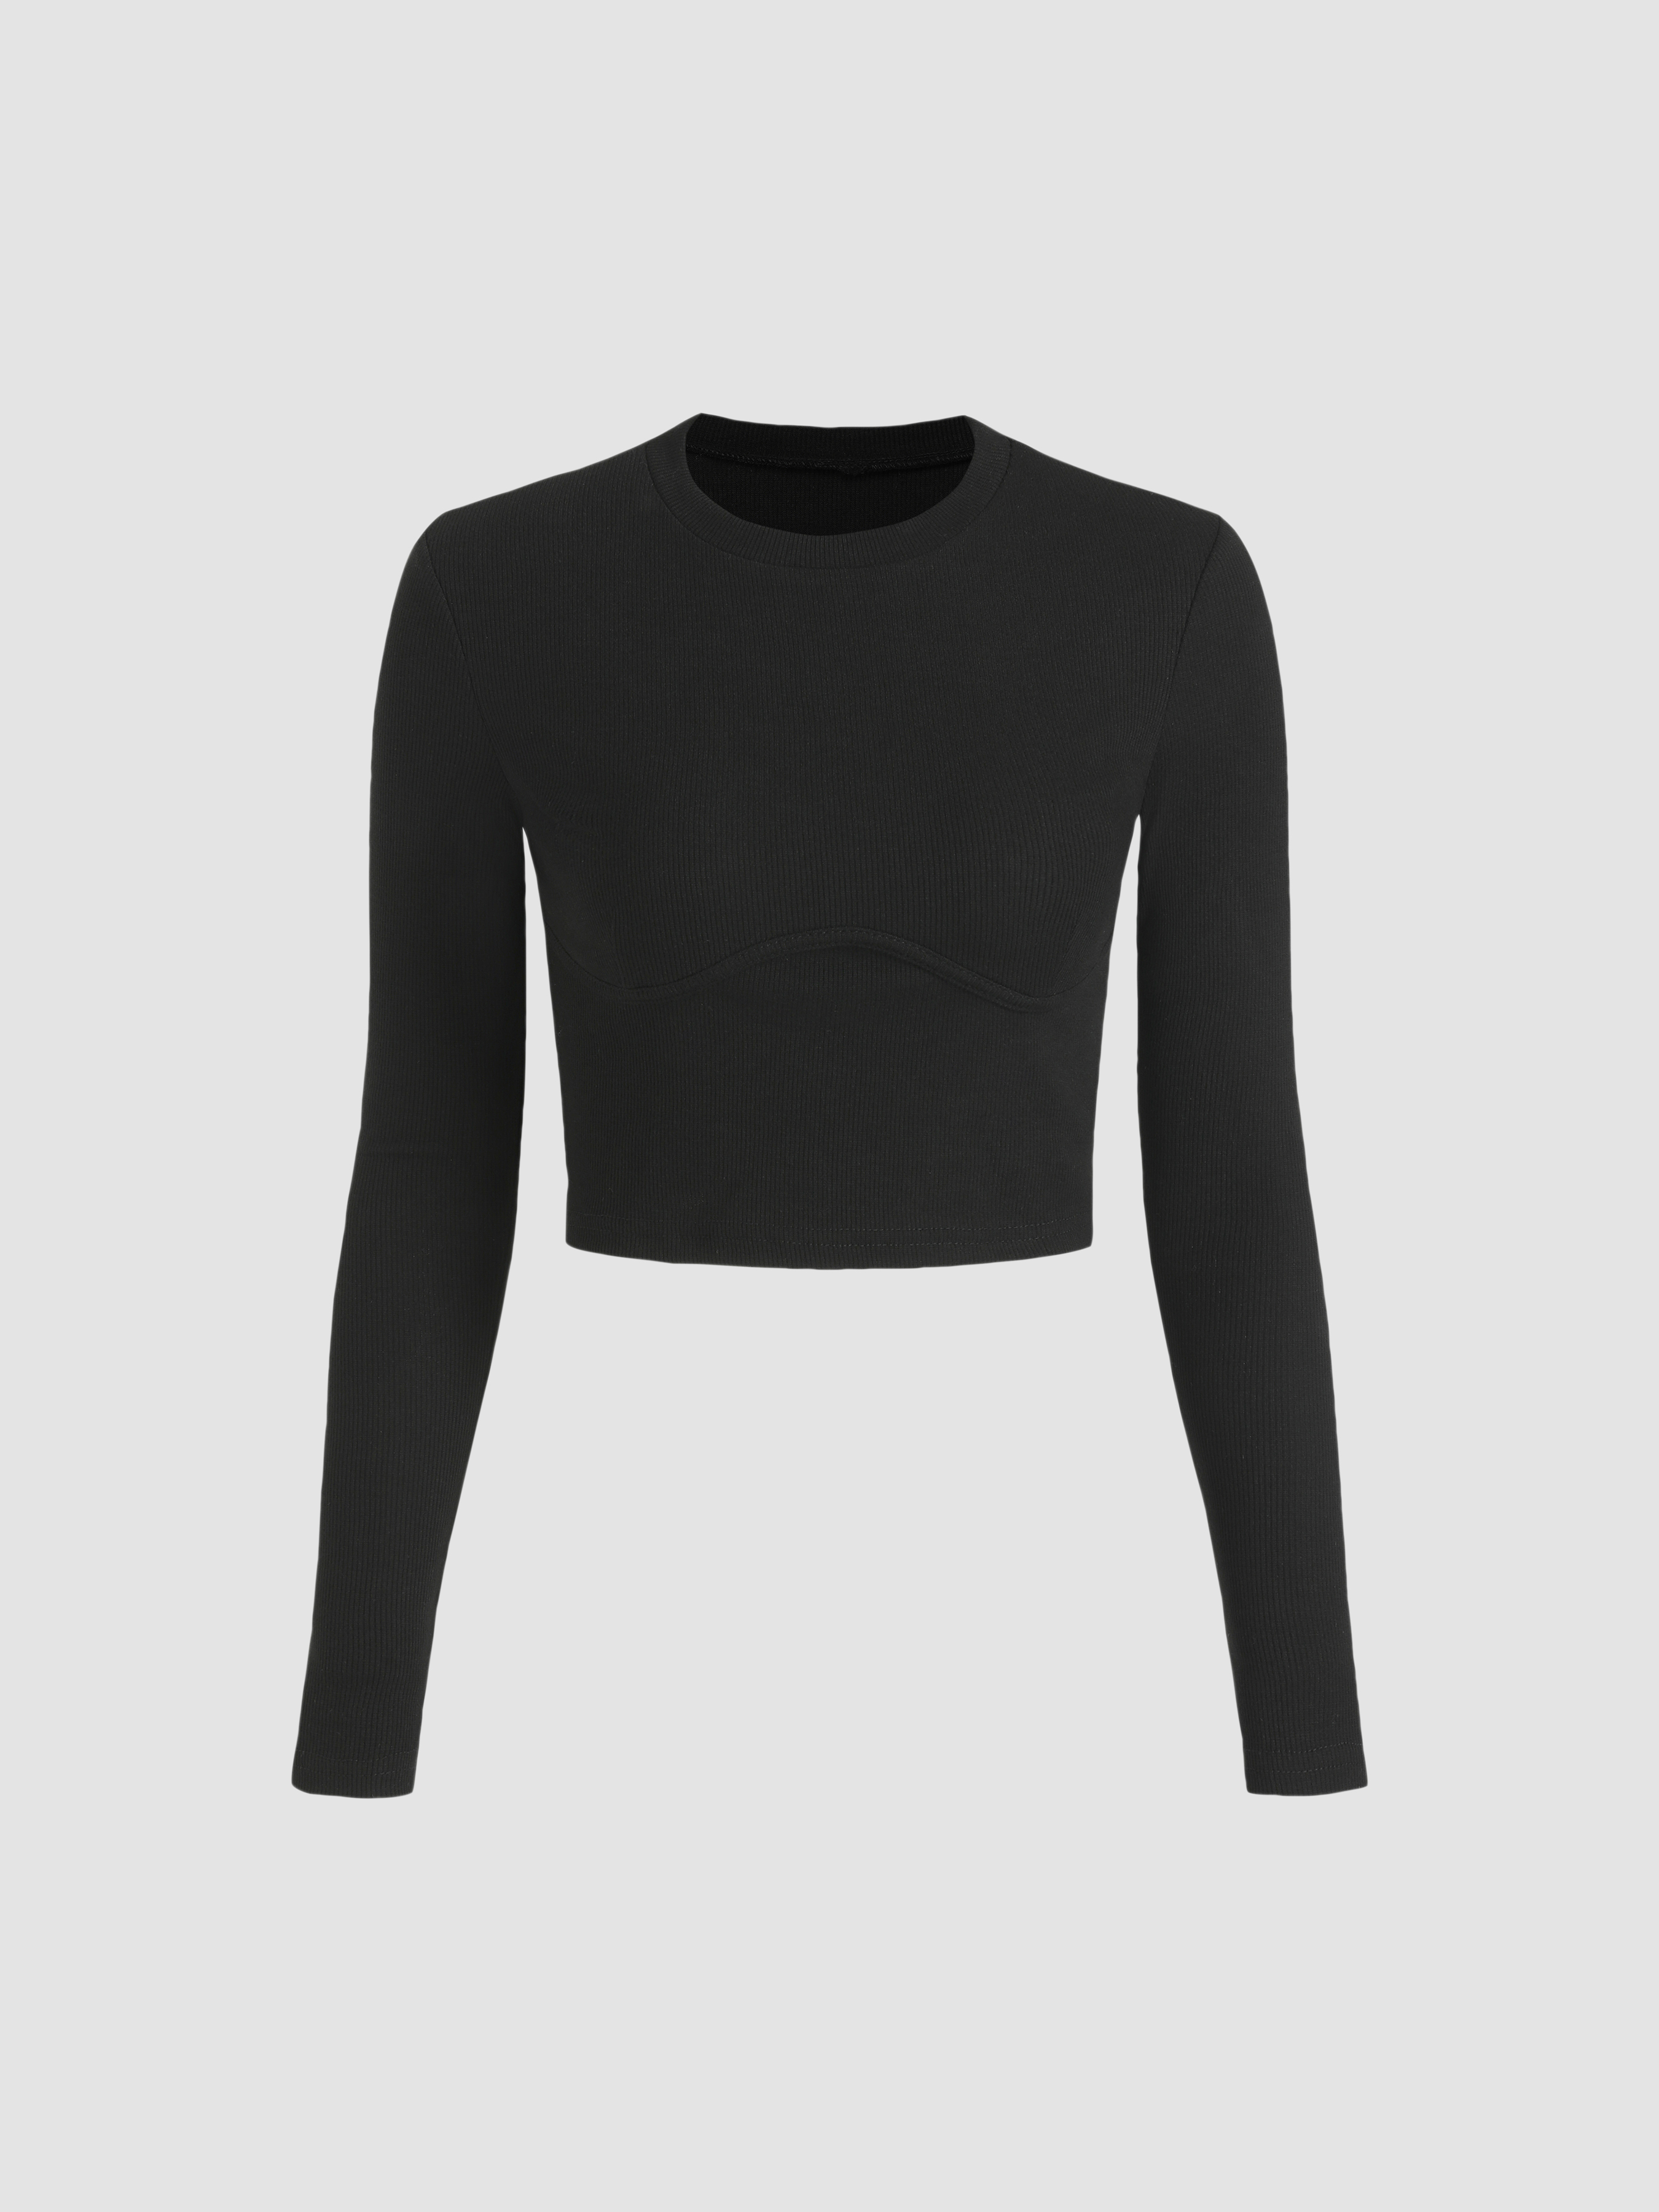 Solid Knit Long Sleeve Top - Cider